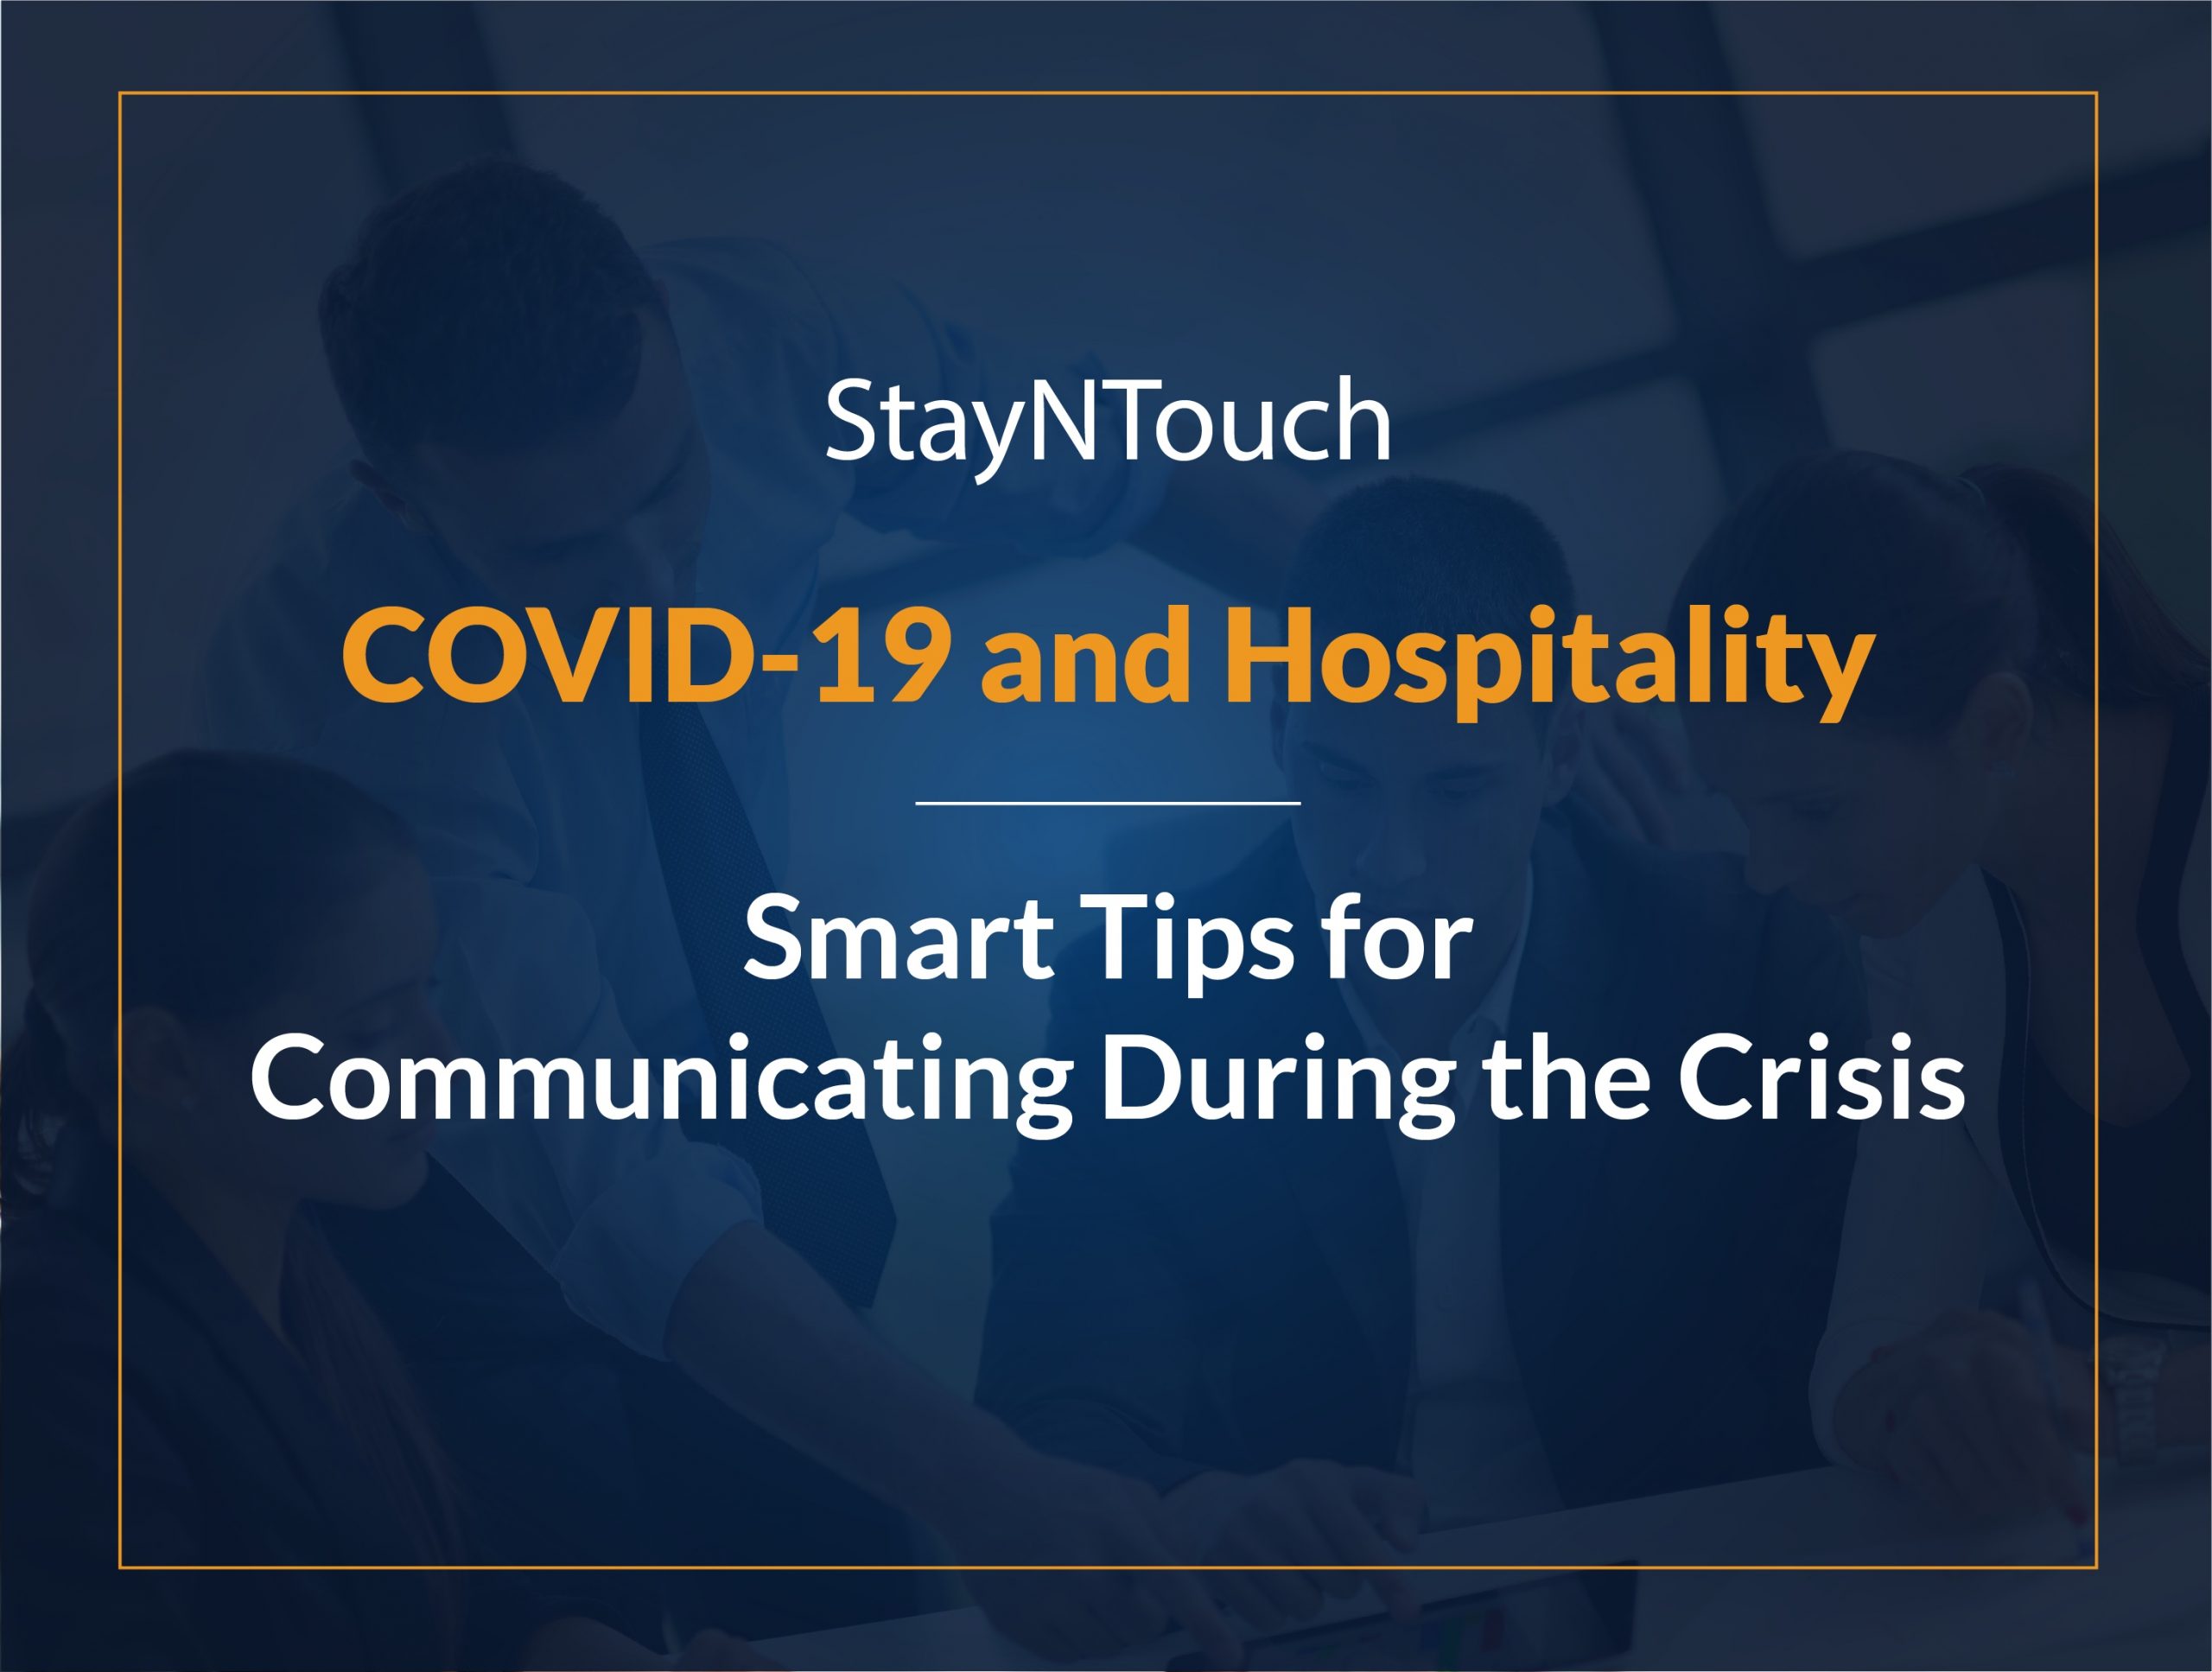 Smart tips for hospitality communication during the COVID-19 Crisis